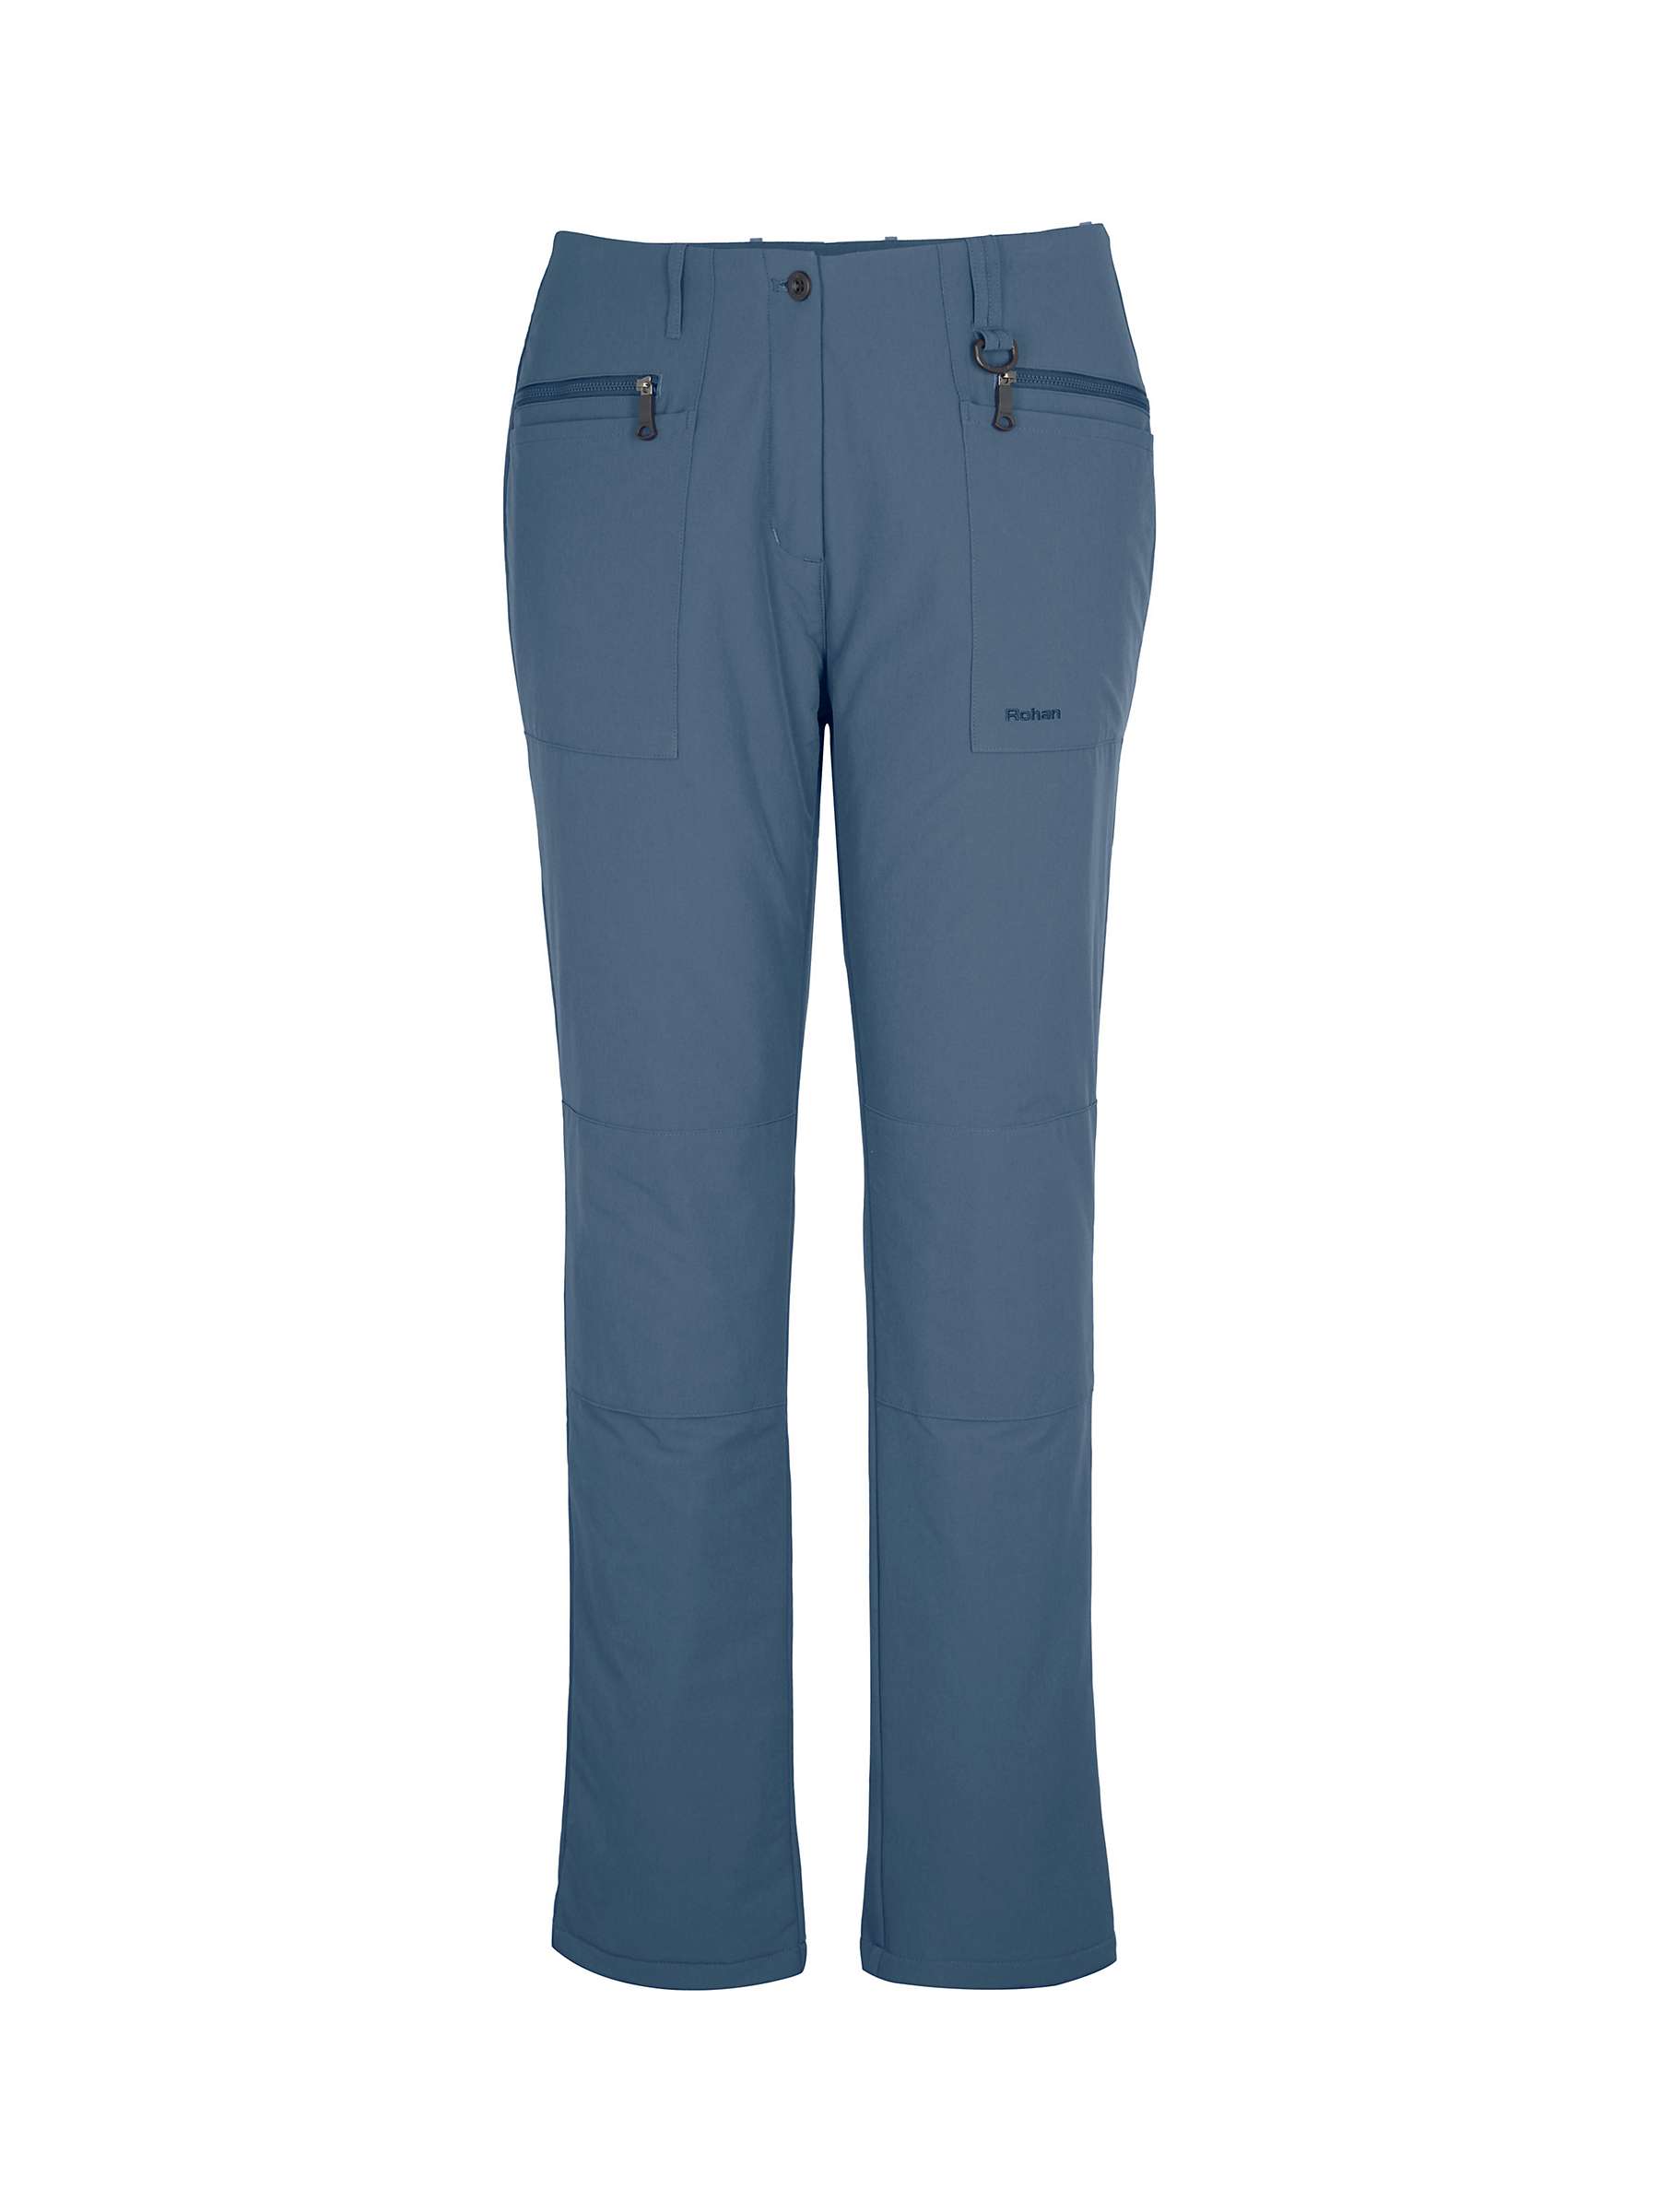 Buy Rohan Winter Stretch Bags Walking Trousers Online at johnlewis.com